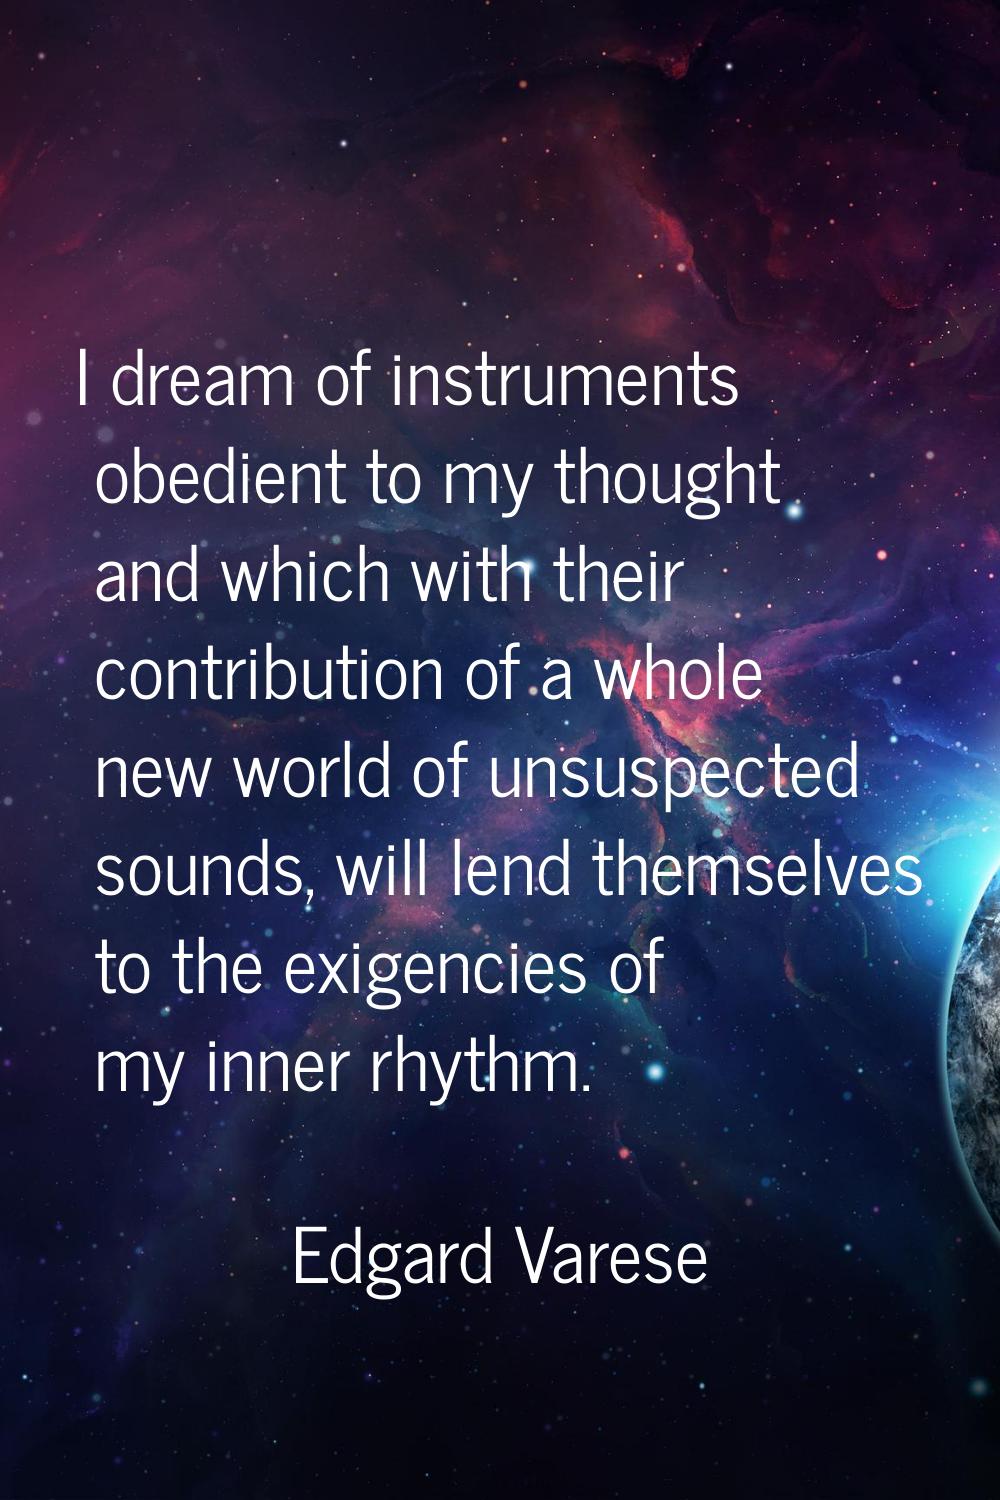 I dream of instruments obedient to my thought and which with their contribution of a whole new worl